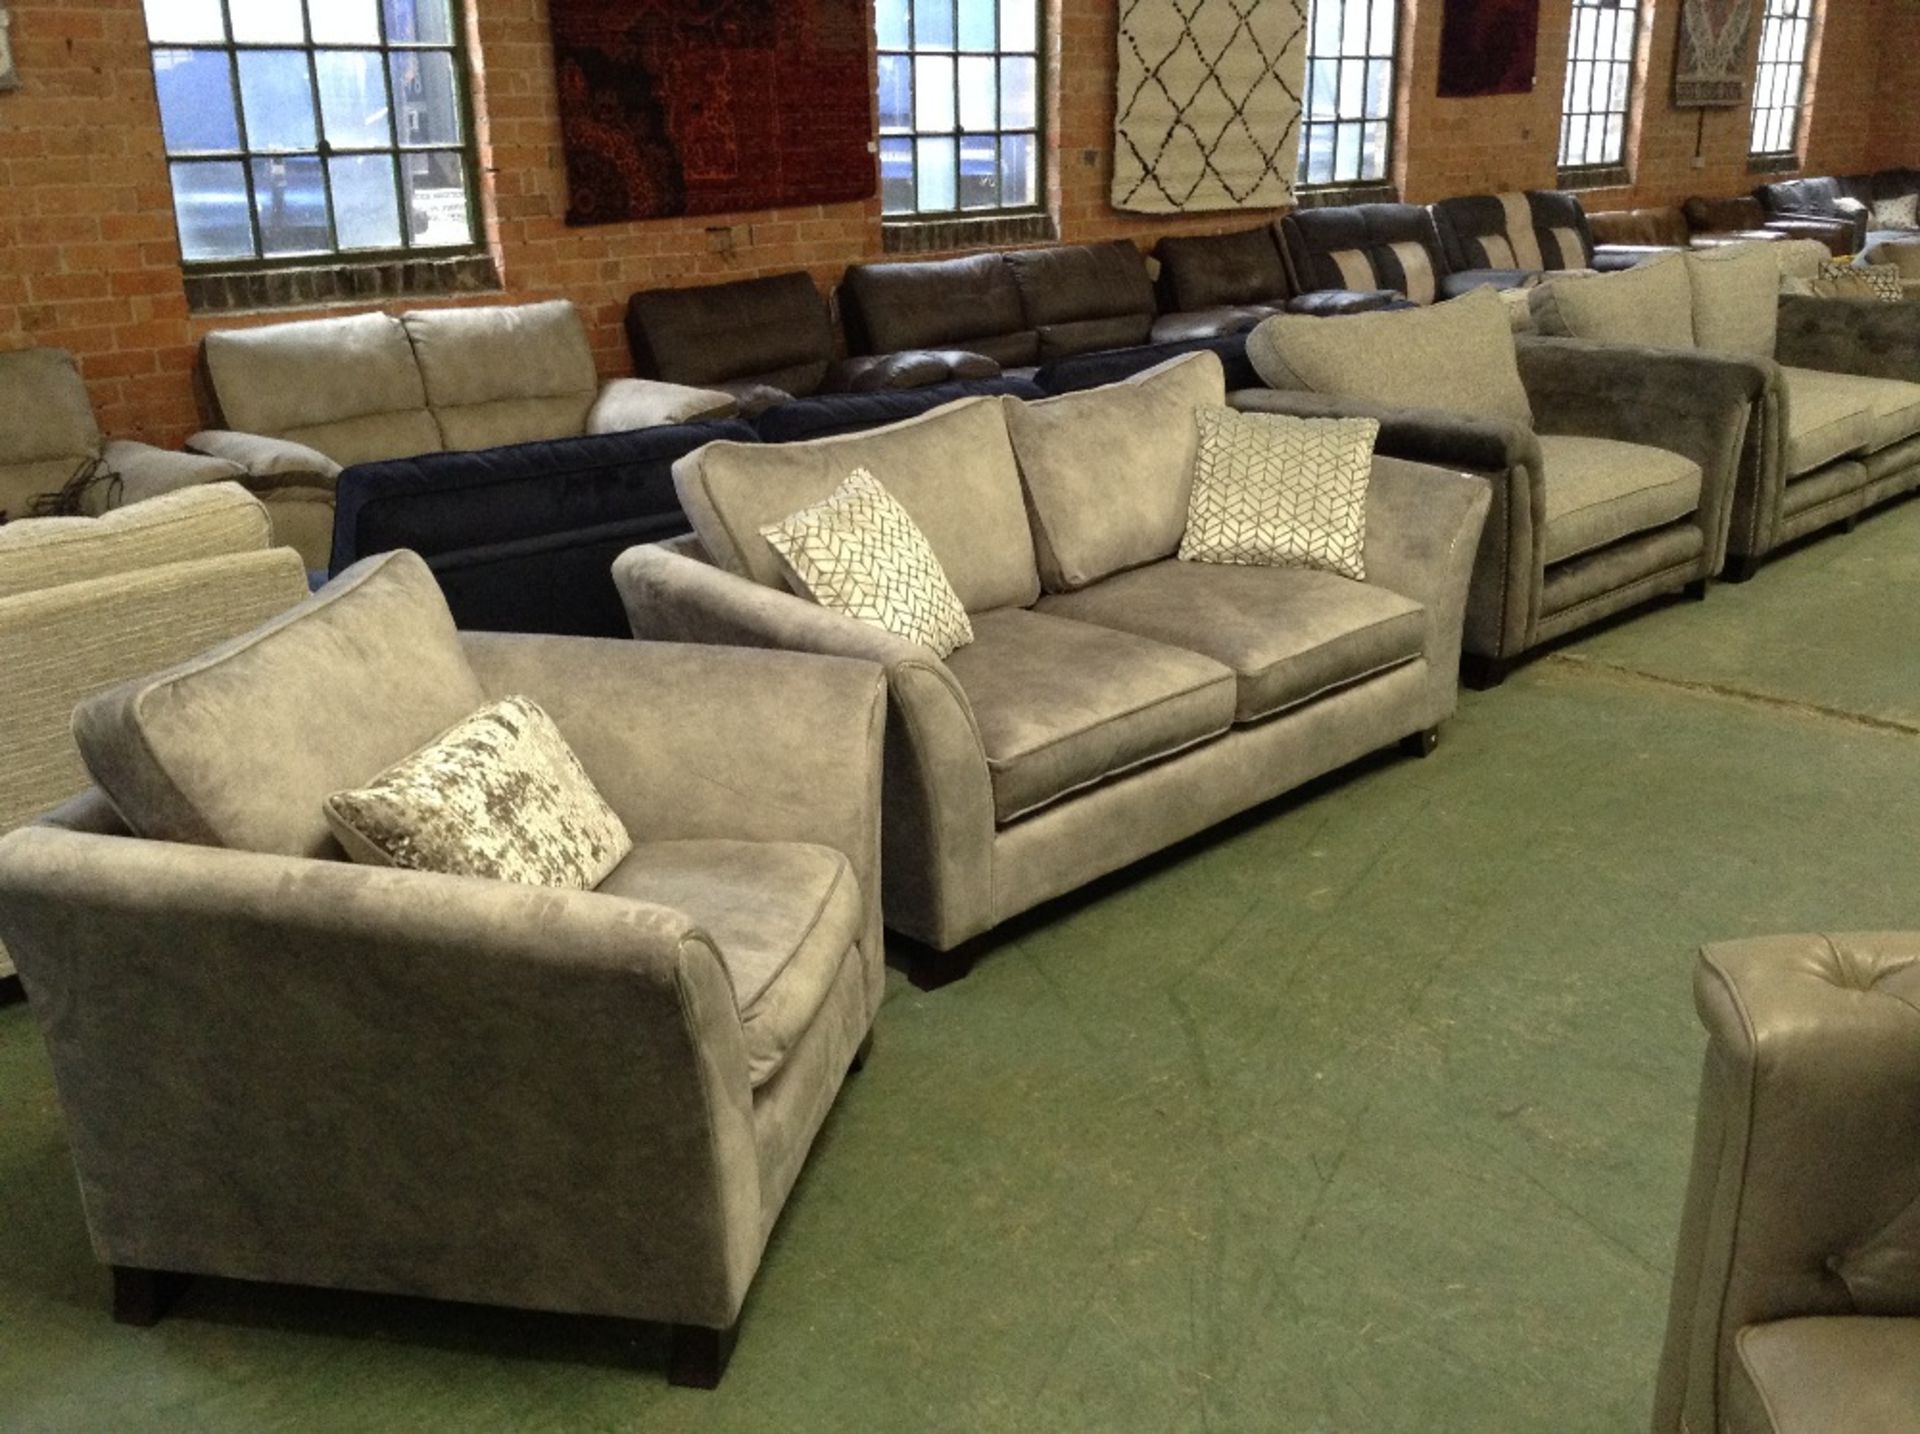 SILVER SADDLE 3 SEATER SOFA AND CHAIR (WM82-10-11)